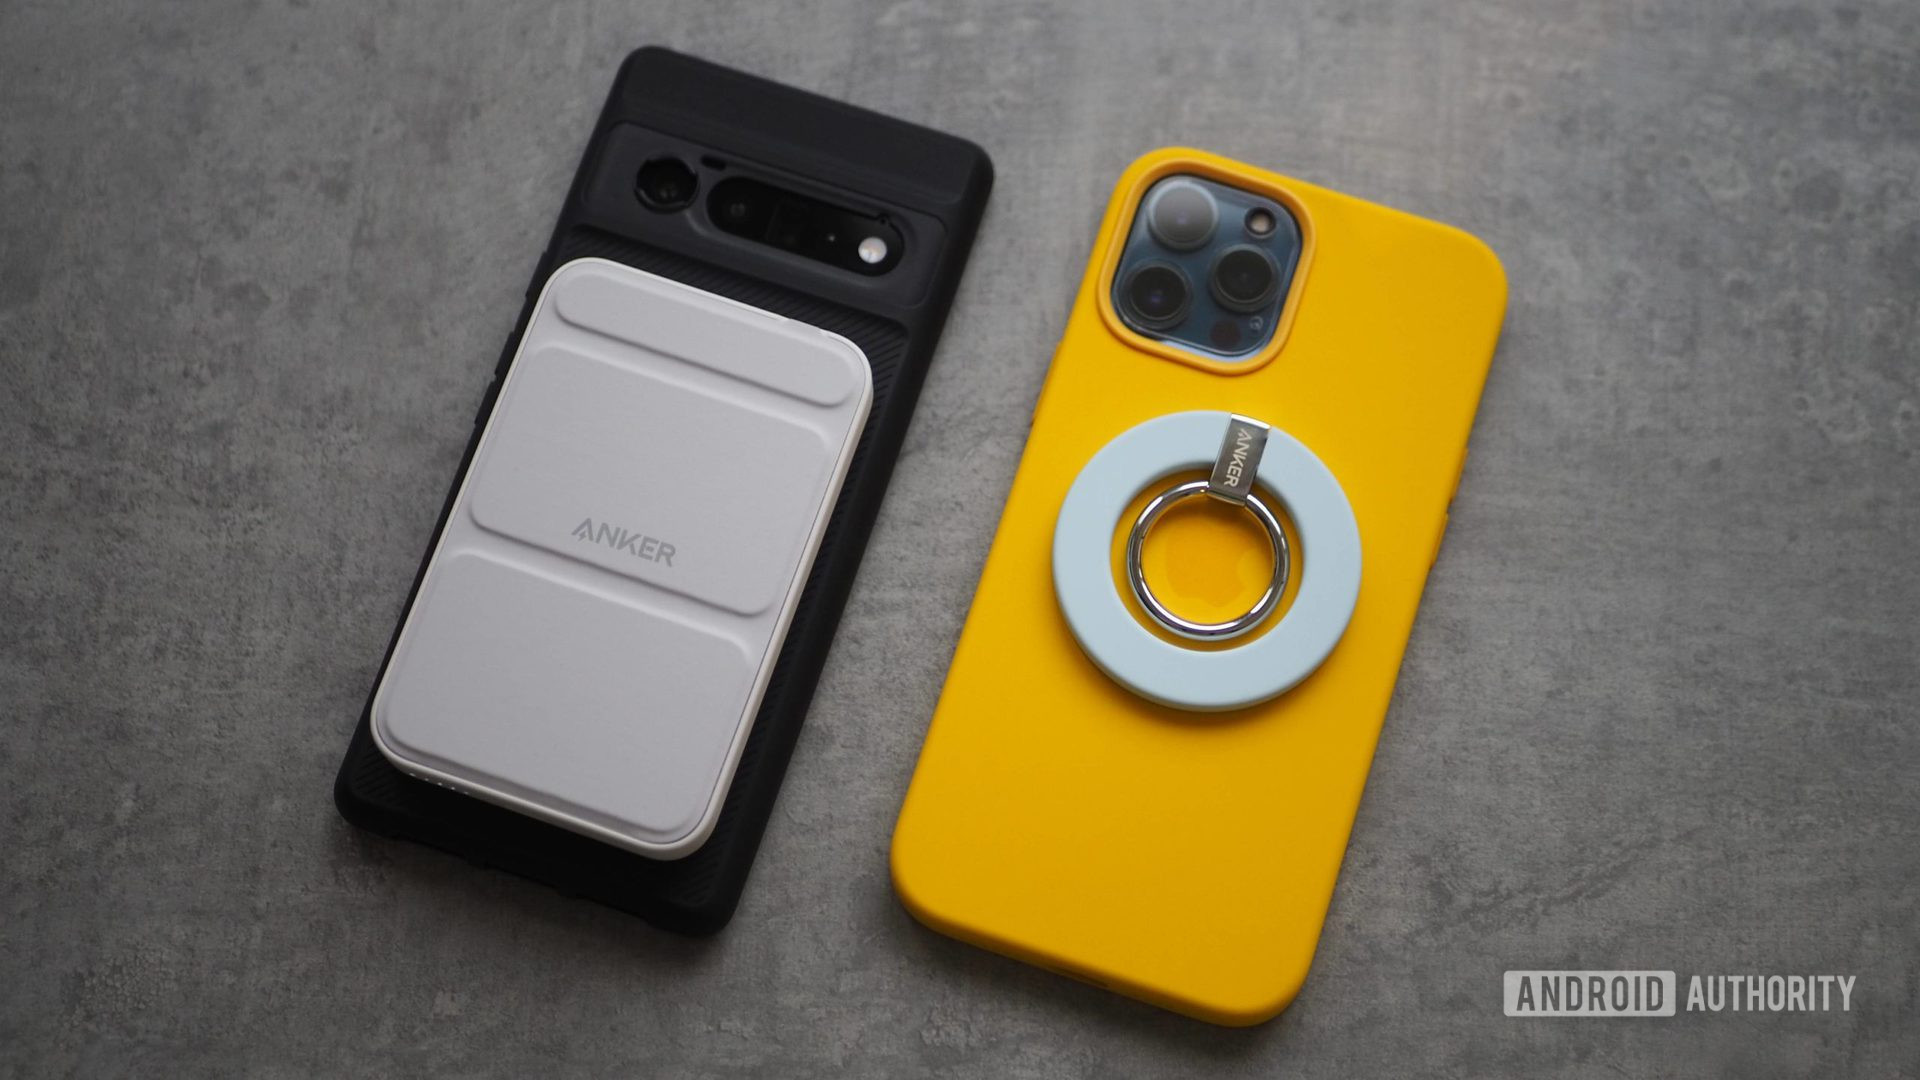 Anker MagGo 622 powerbank on Pixel 6 Pro with Moment (M) Force case, Anker MagGo 610 power grip on iPhone 12 Pro Max with yellow Apple MagSafe case